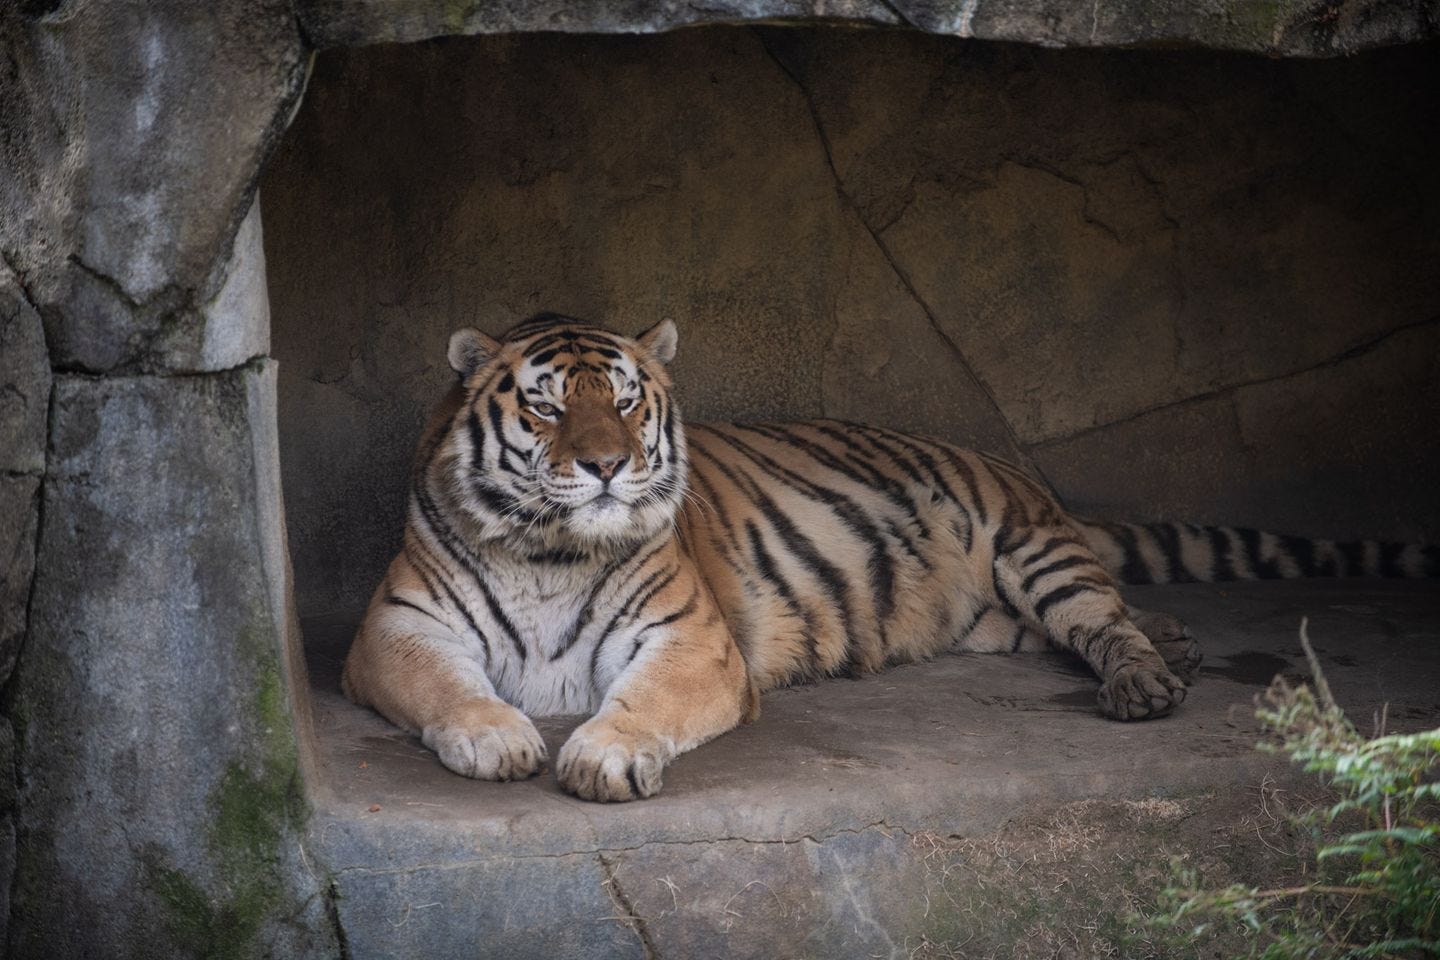 Ohio zoo: 14-year-old Tiger dies due to COVID-19 complications